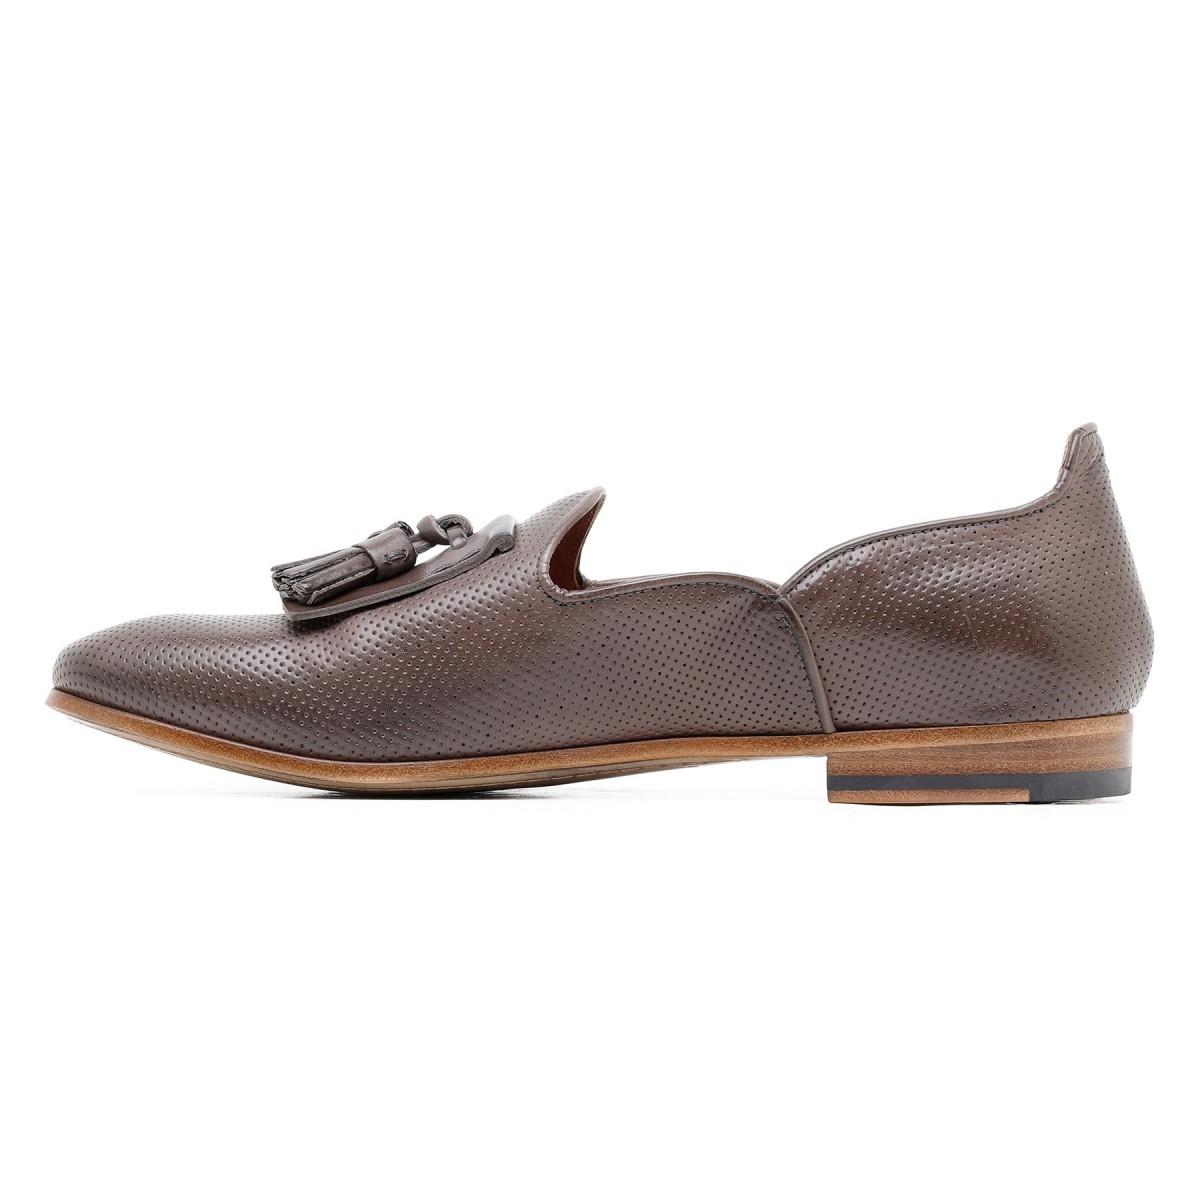 Tassels brown leather slippers